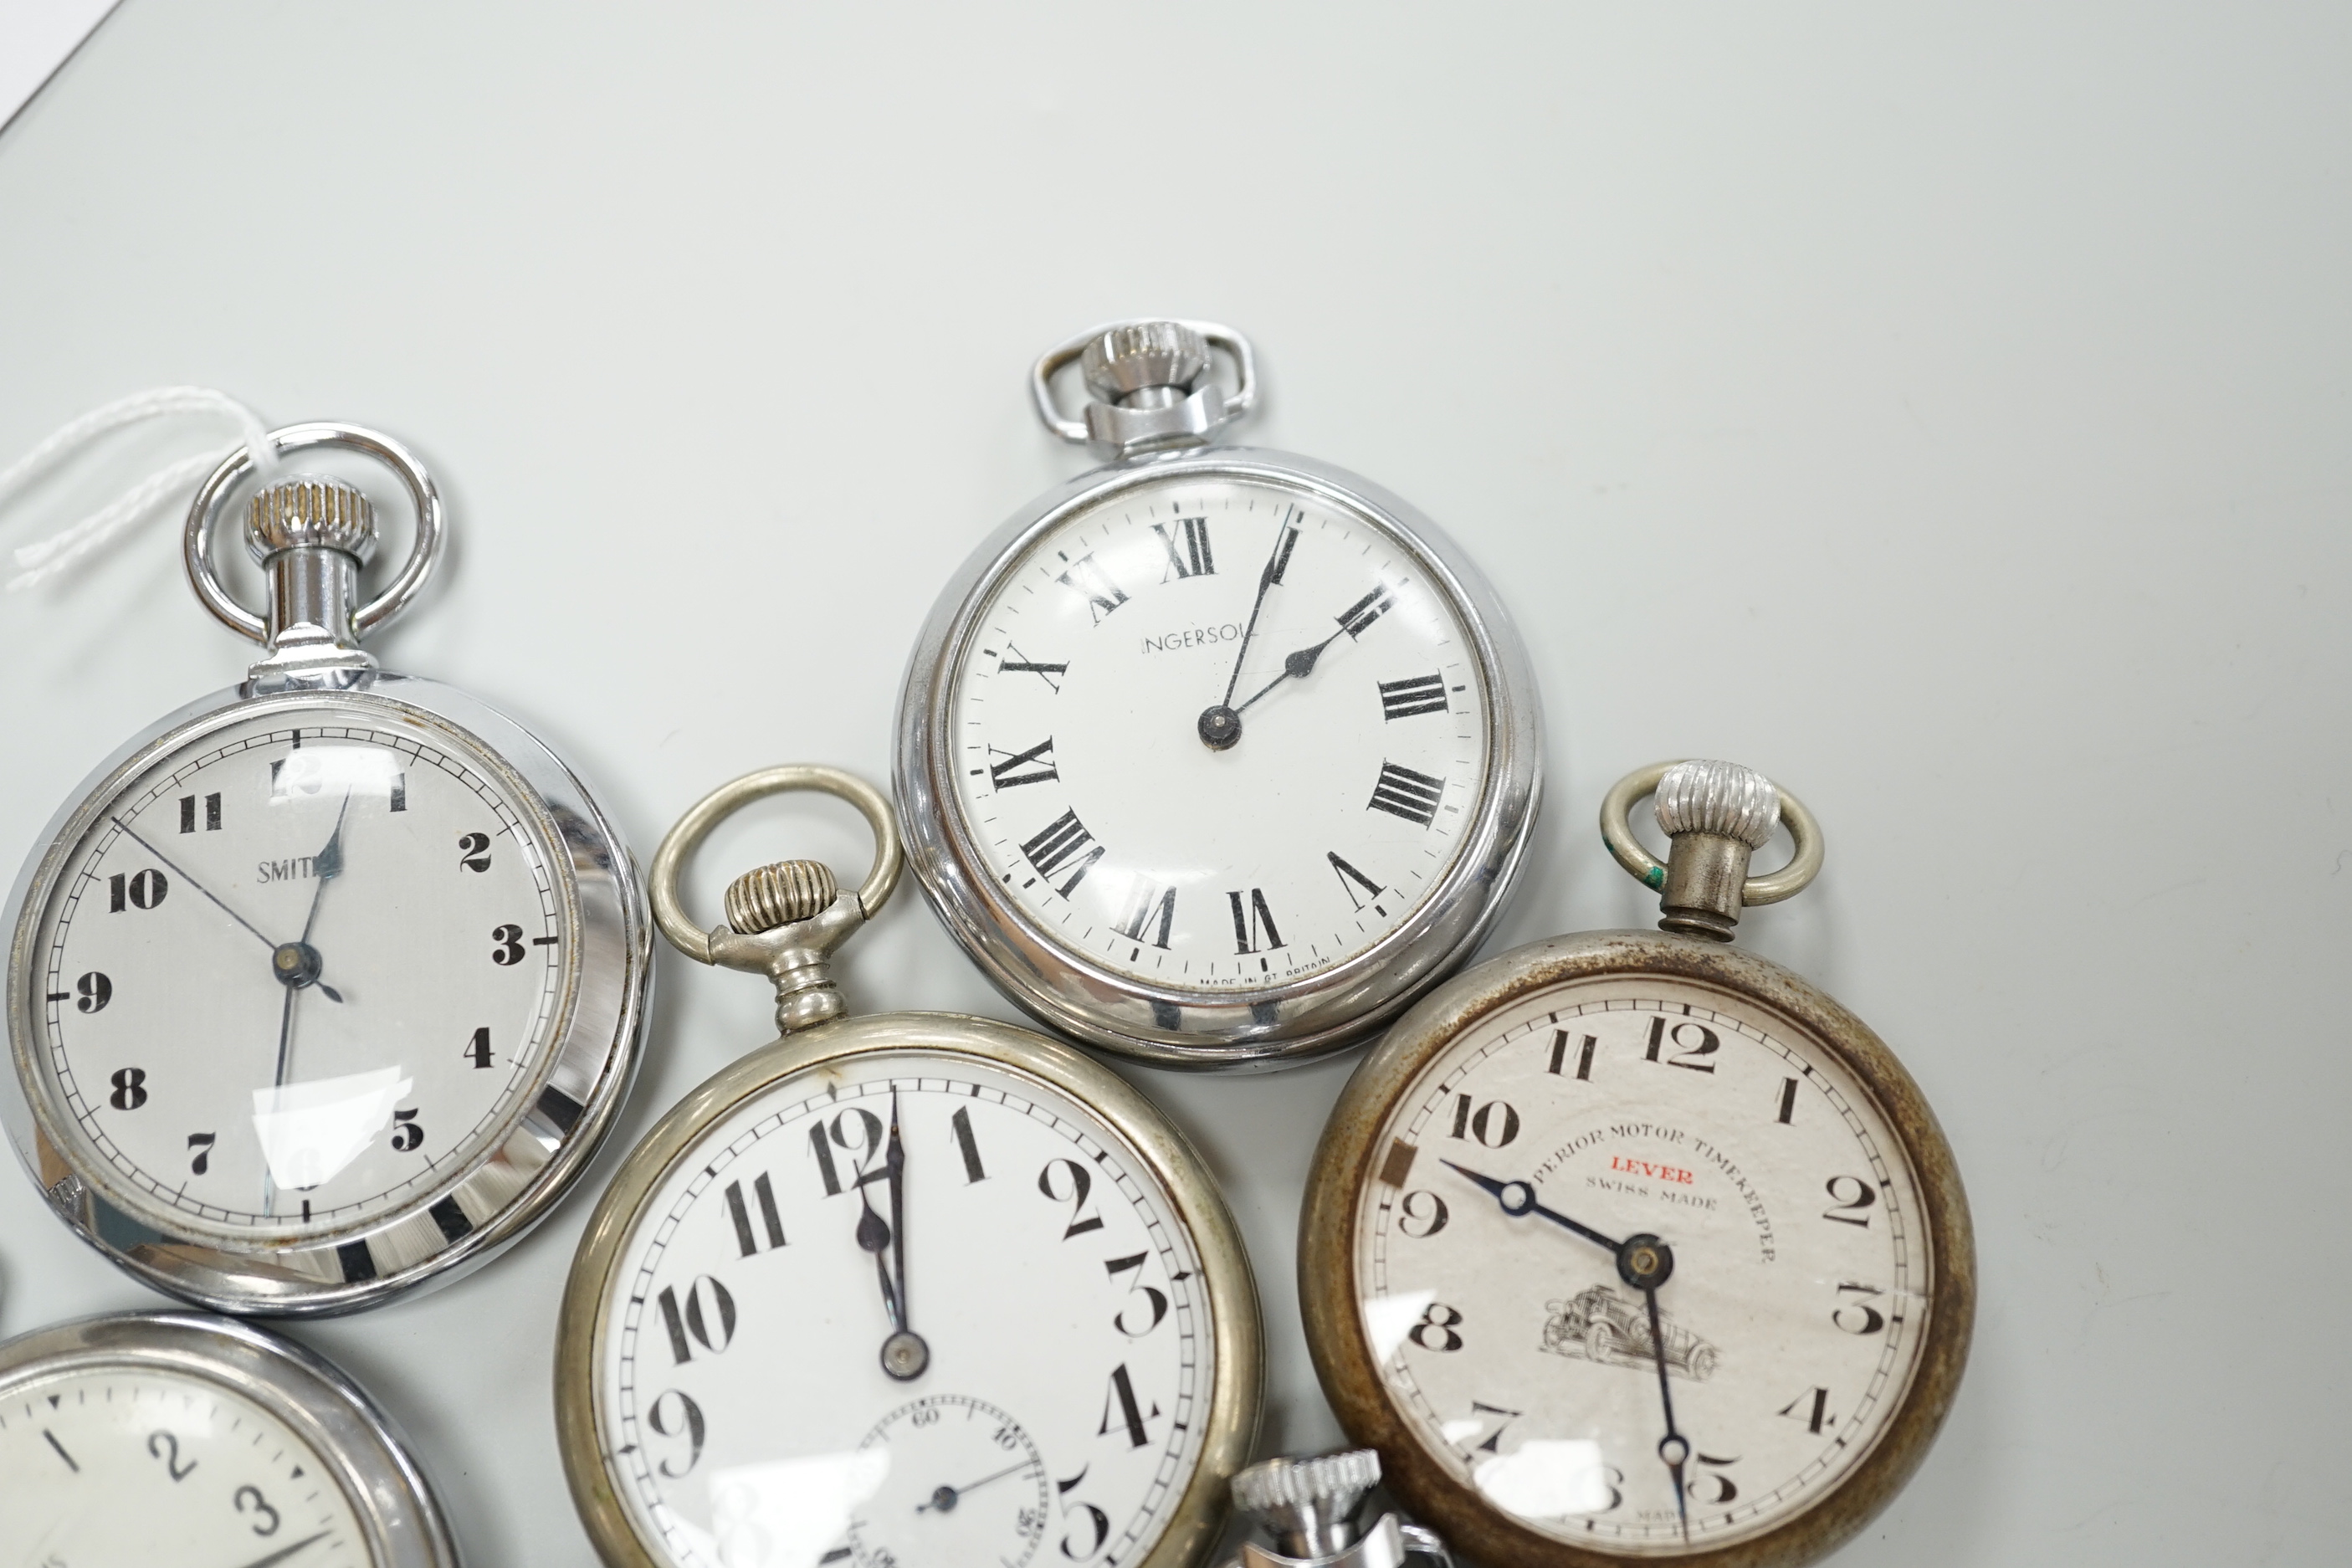 Eight assorted chrome or nickel cased pocket watches, including three Smiths, two Ingersoll, one Record and two others.